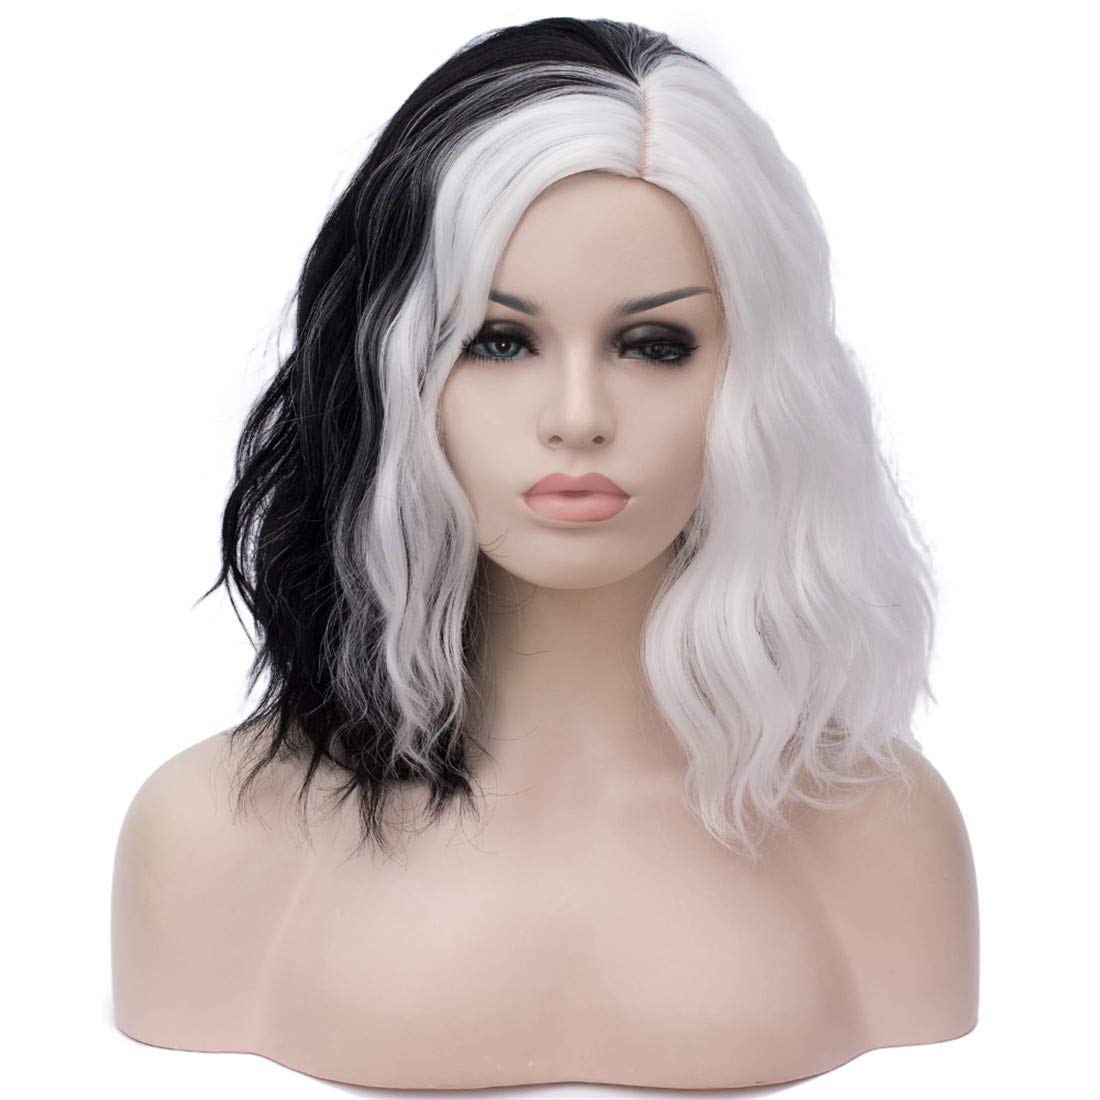 Price:$16.99    Cying Lin Short Bob Wavy Curly Wig Lady Costume Wig For Women Cosplay Halloween Wigs Heat Resistant Bob Party Wig Include Wig Cap Costume Accessory(Black and White)  Beauty